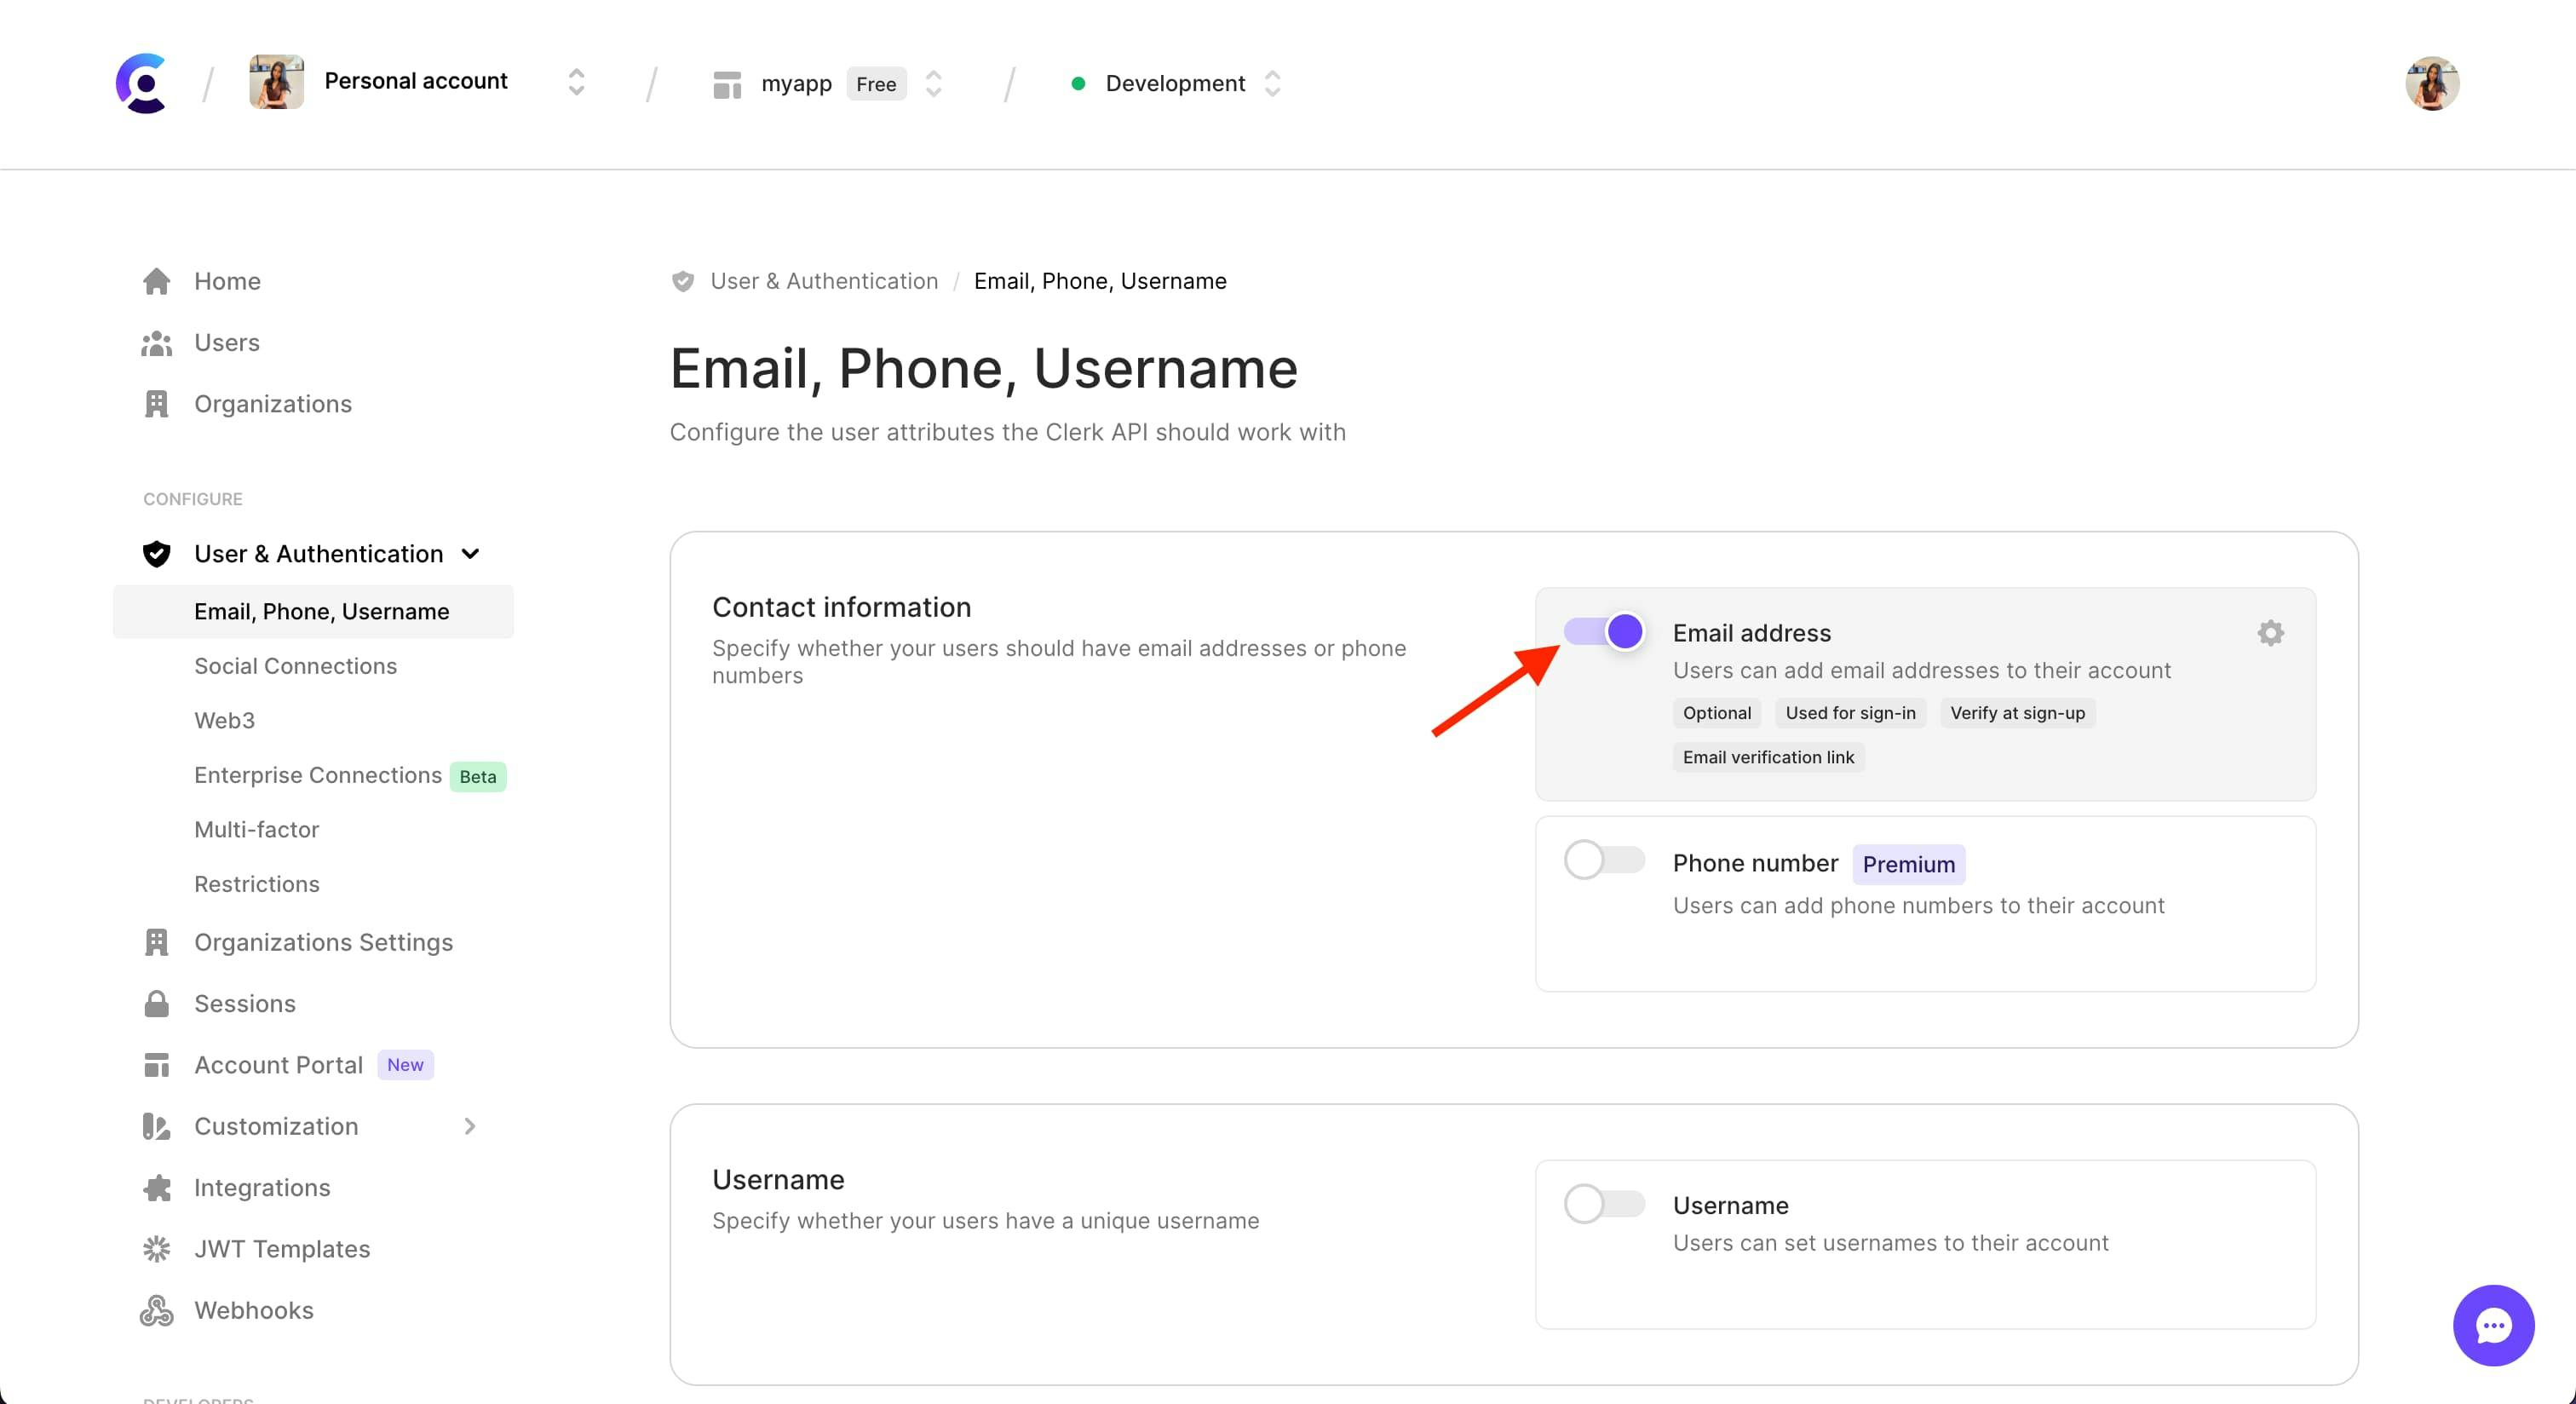 The 'Contact information' section of the 'Email, Phone, and Username' page in the Clerk dashboard. There is a red arrow pointing to the 'Email address' toggle, which is toggled on.